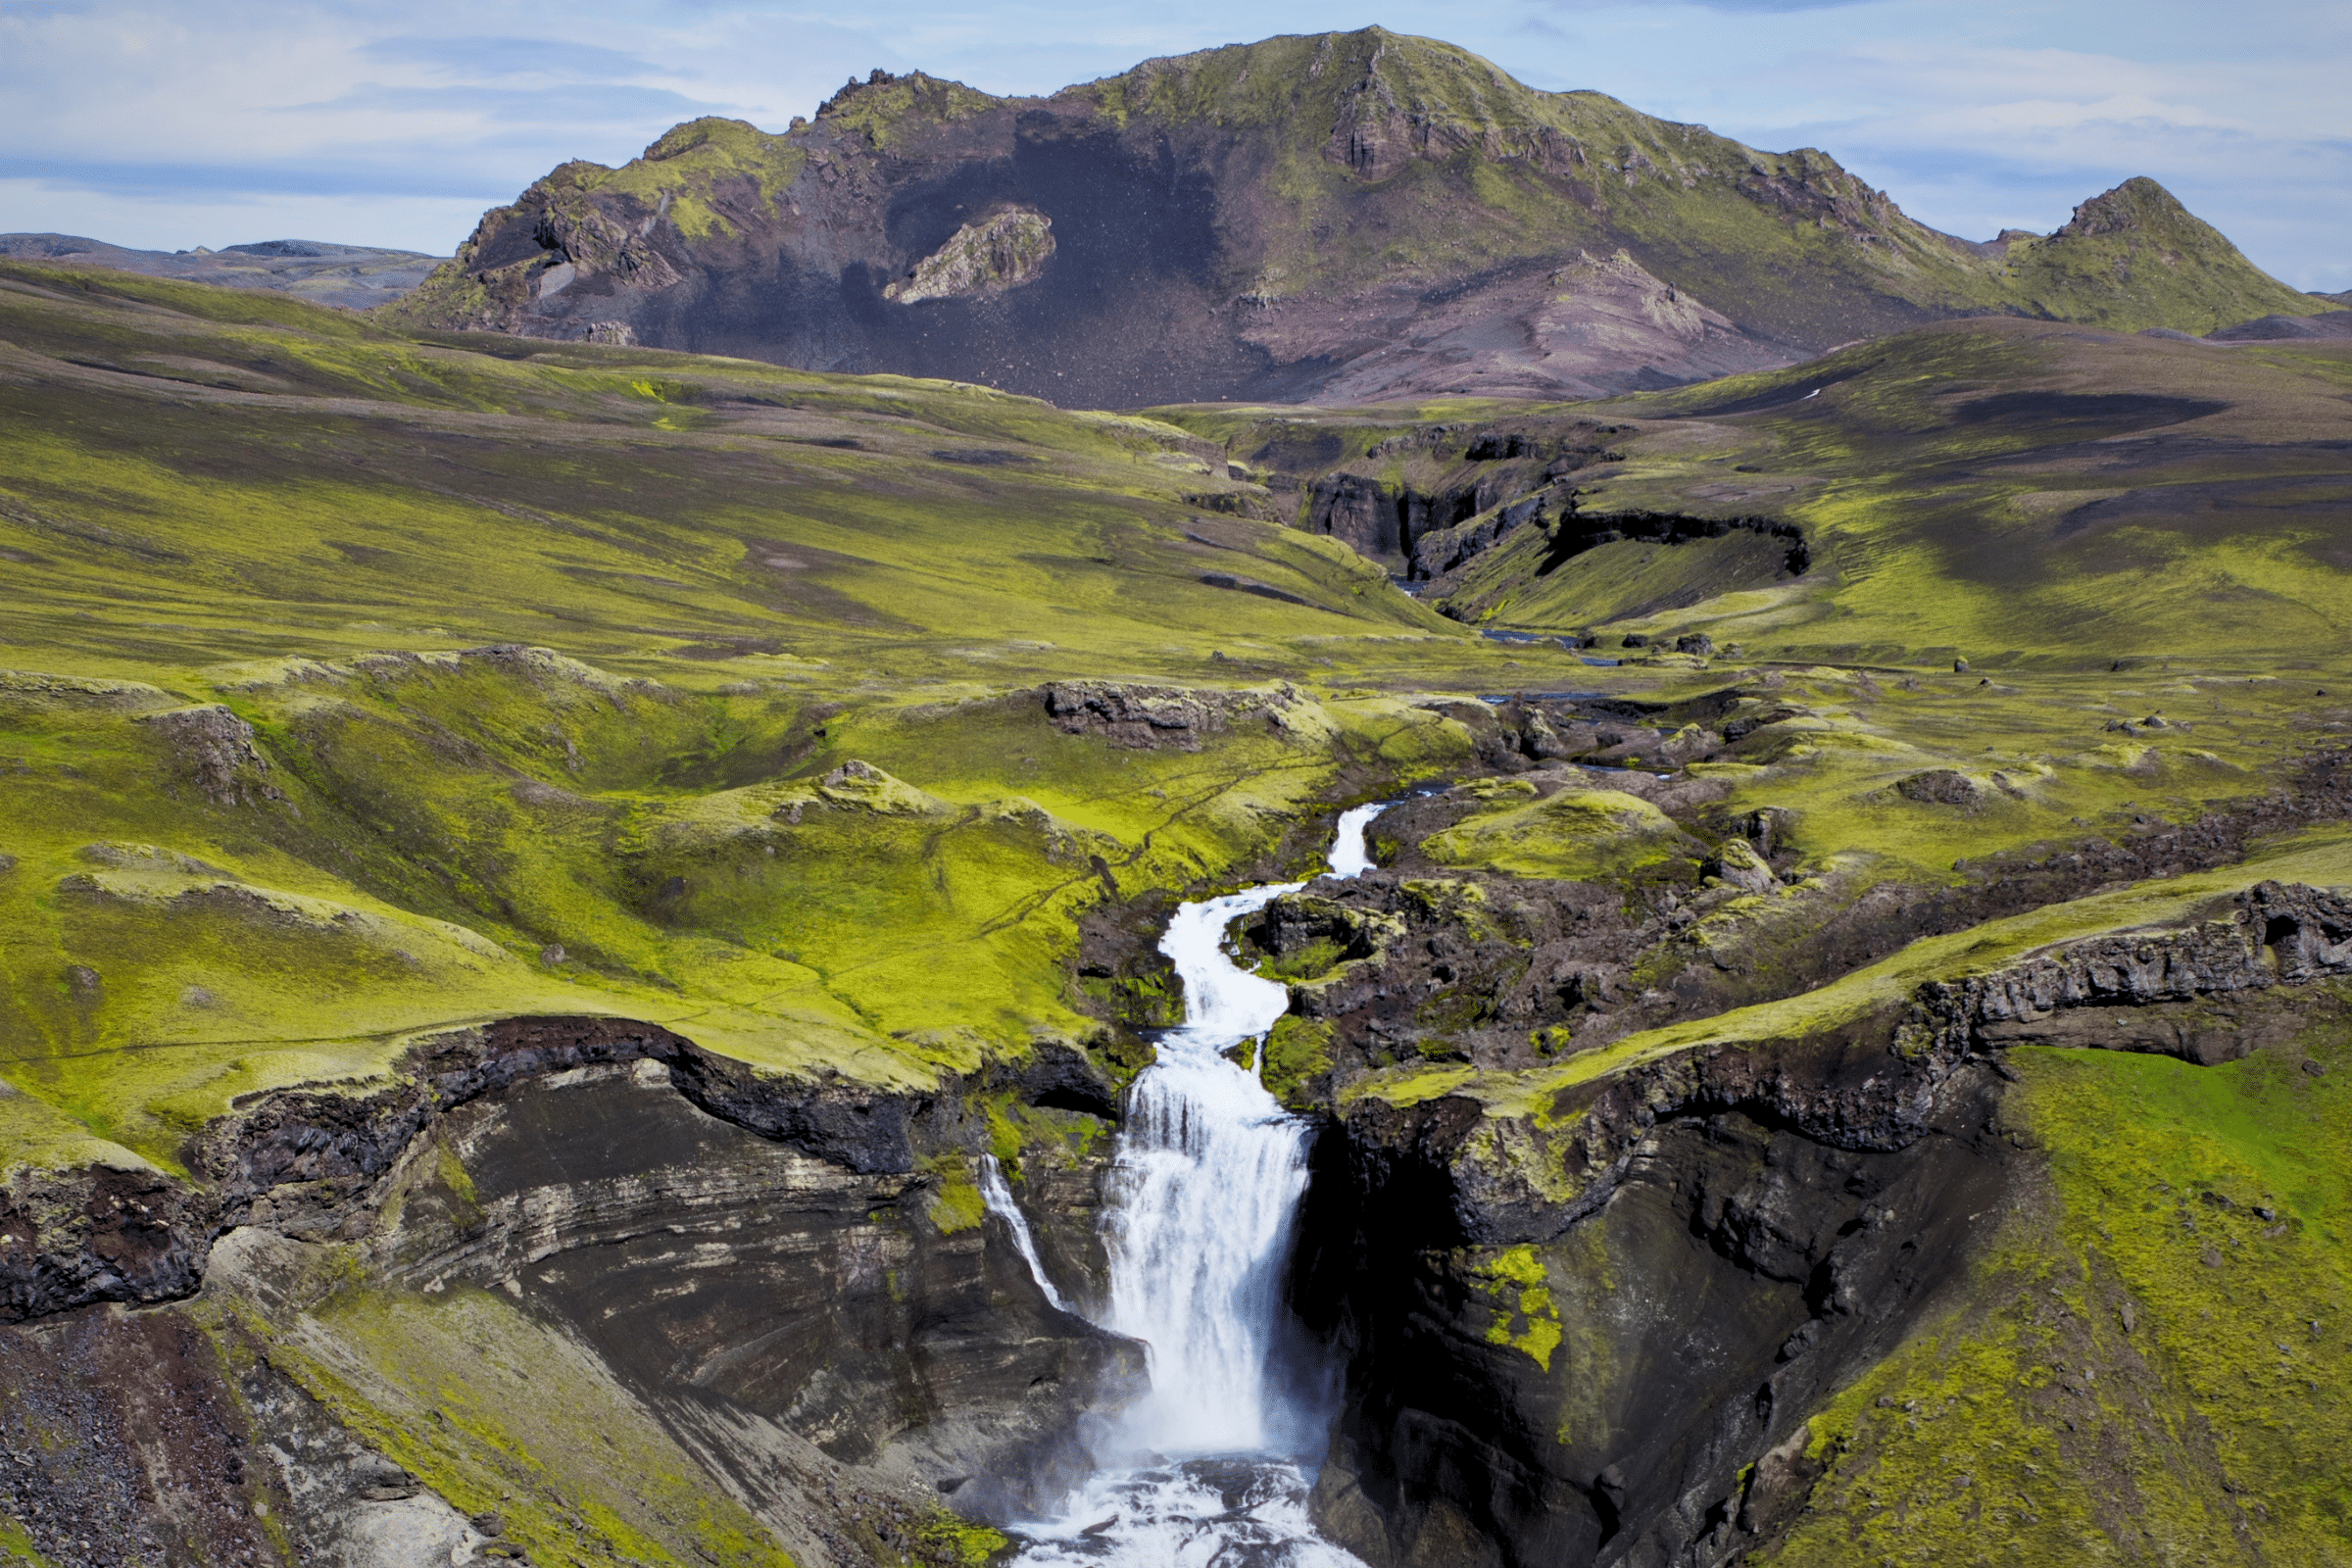 Ófærufoss Waterfall and Elgjá Canyon in the Icelandic Highlands.